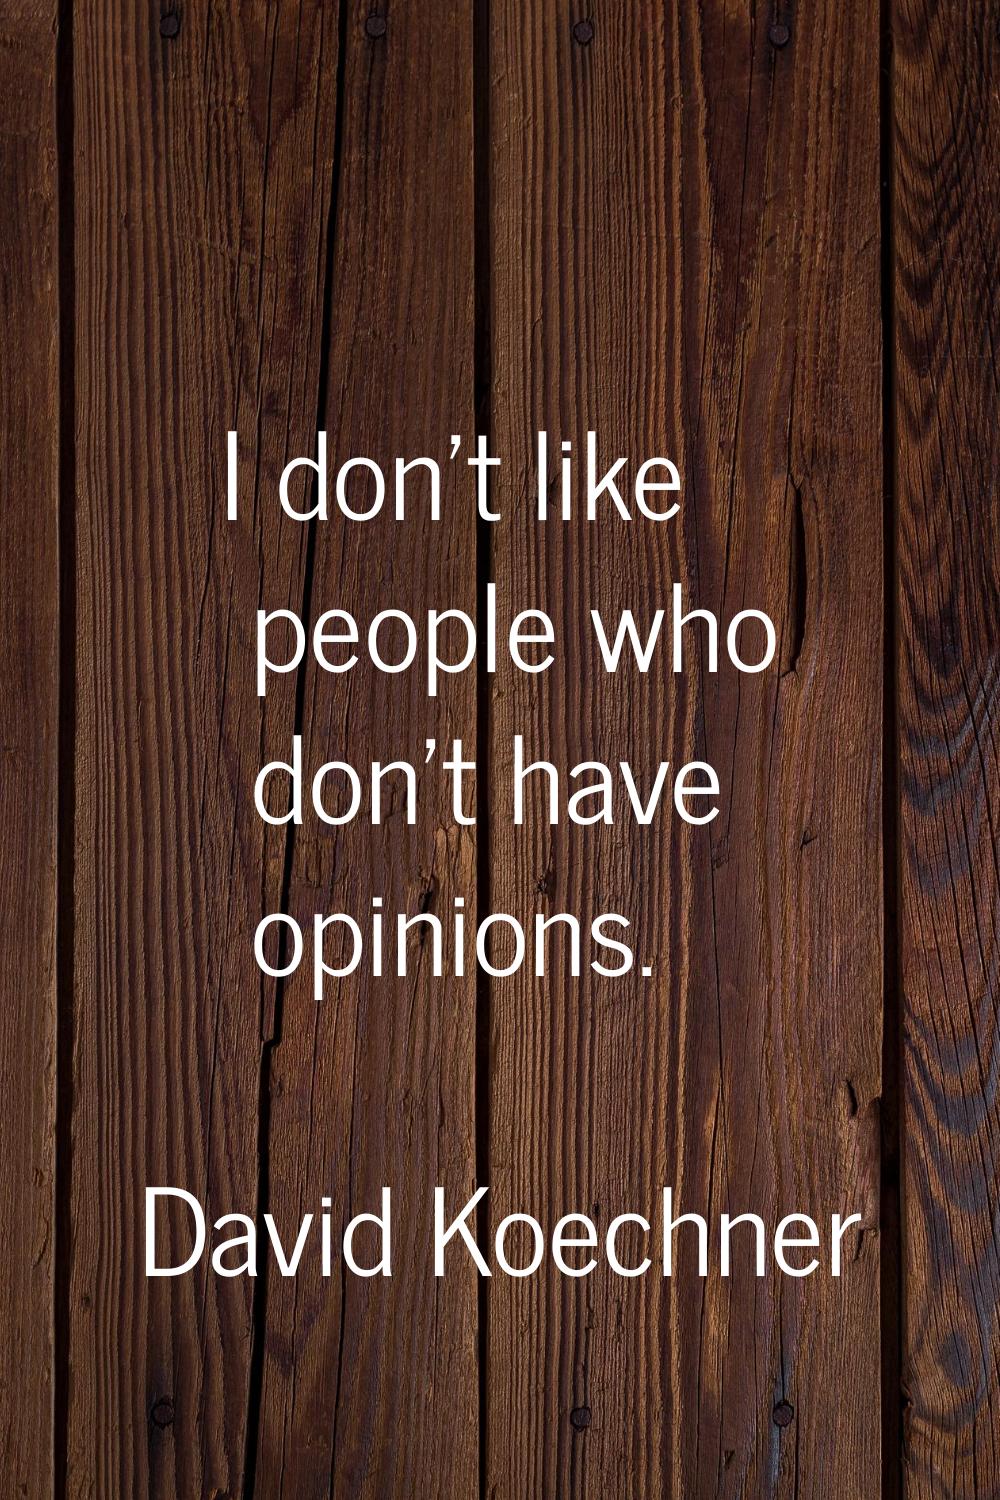 I don't like people who don't have opinions.